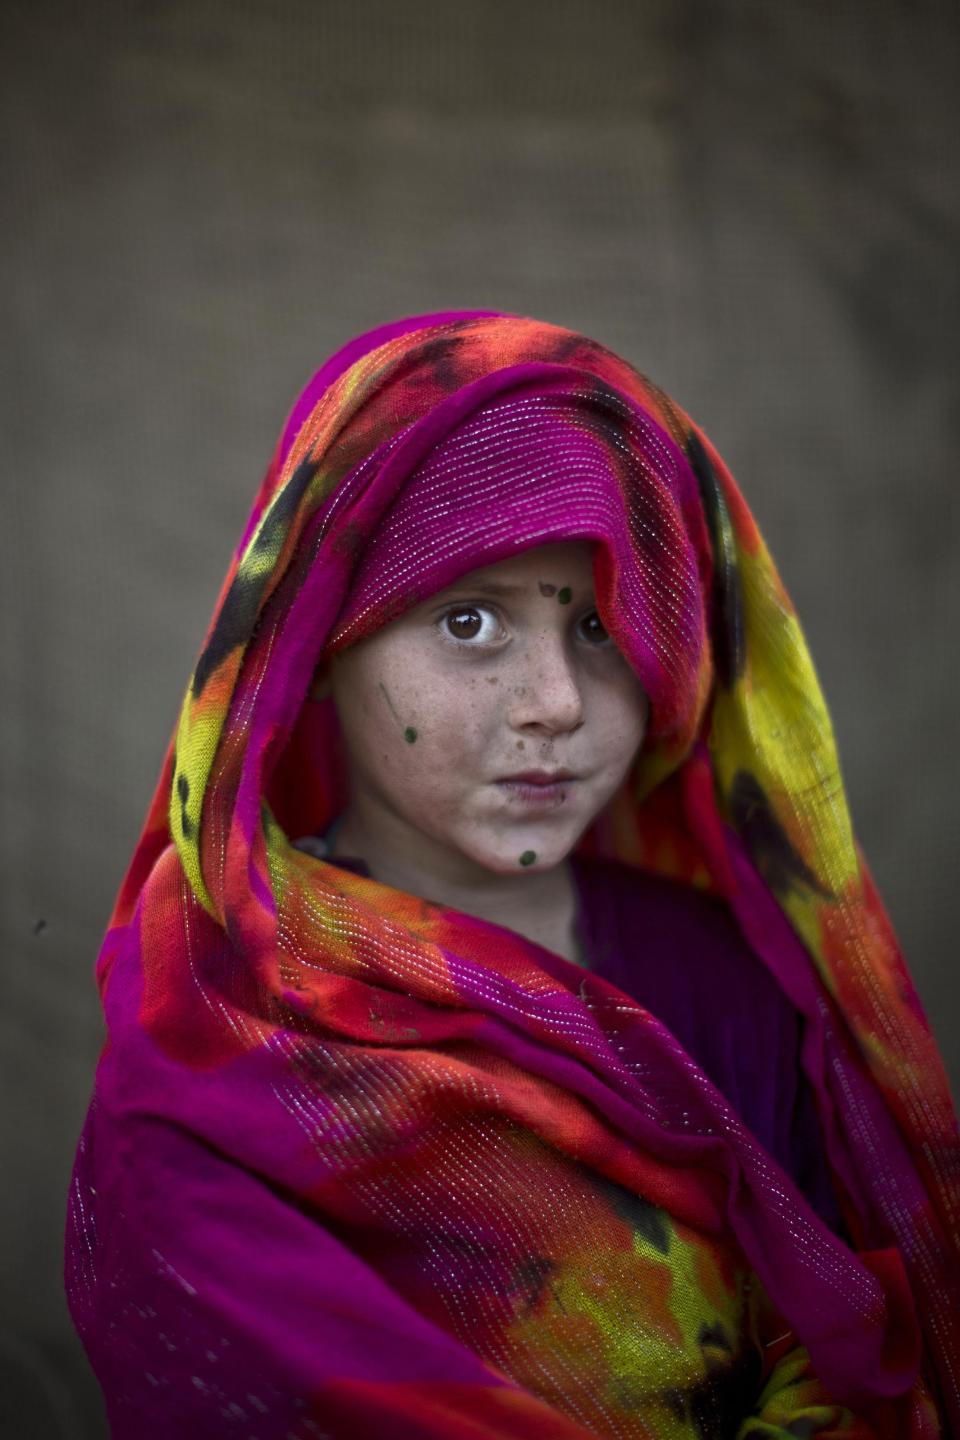 In this Friday, Jan. 24, 2014 photo, Afghan refugee girl, Robina Haseeb, 5, poses for a picture, while playing with other children in a slum on the outskirts of Islamabad, Pakistan. For more than three decades, Pakistan has been home to one of the world’s largest refugee communities: hundreds of thousands of Afghans who have fled the repeated wars and fighting their country has undergone. Since the 2002 U.S.-led invasion of Afghanistan, some 3.8 million Afghans have returned to their home country, according to the U.N.’s refugee agency. (AP Photo/Muhammed Muheisen)